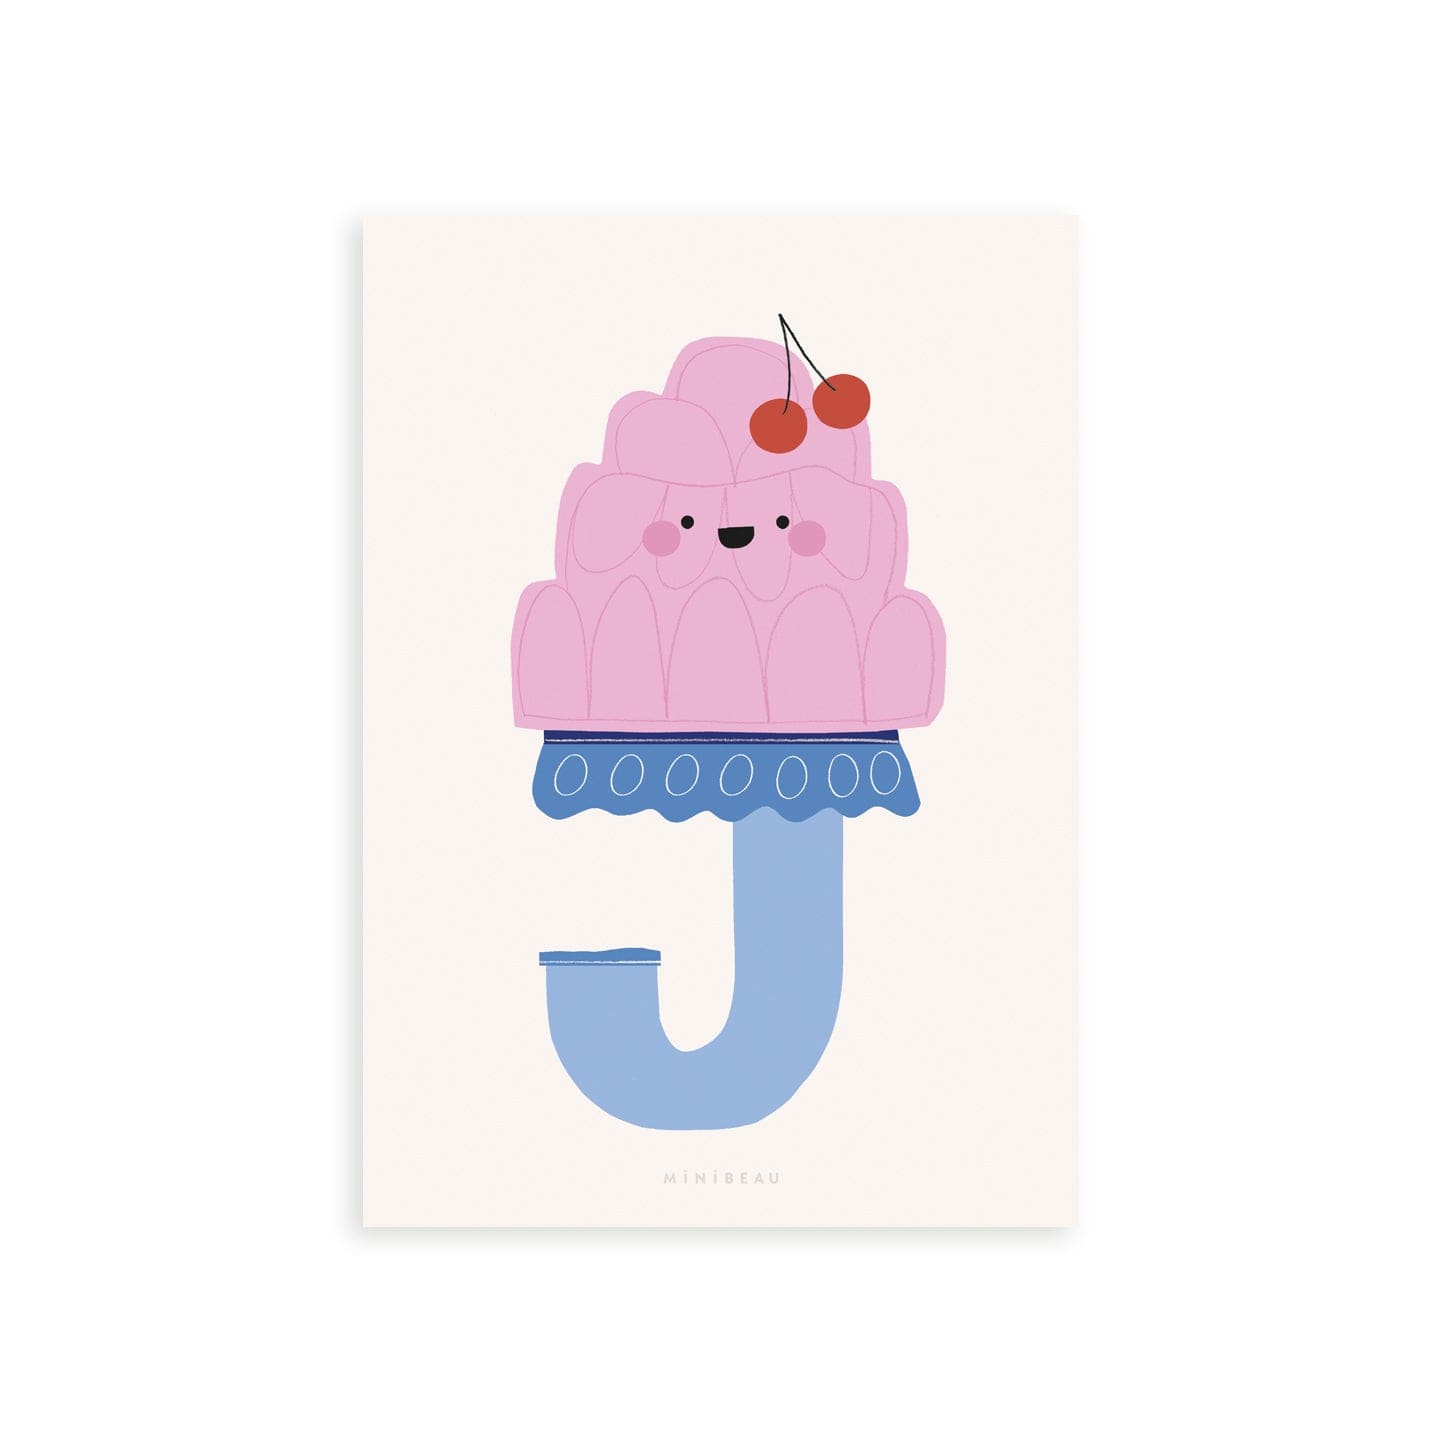 Our Happy Alphabet 'J' Art Print shows a smiling pink moulded jelly on a blue stand in the shape of a J, with cherries on top of the Jelly on a neutral background.